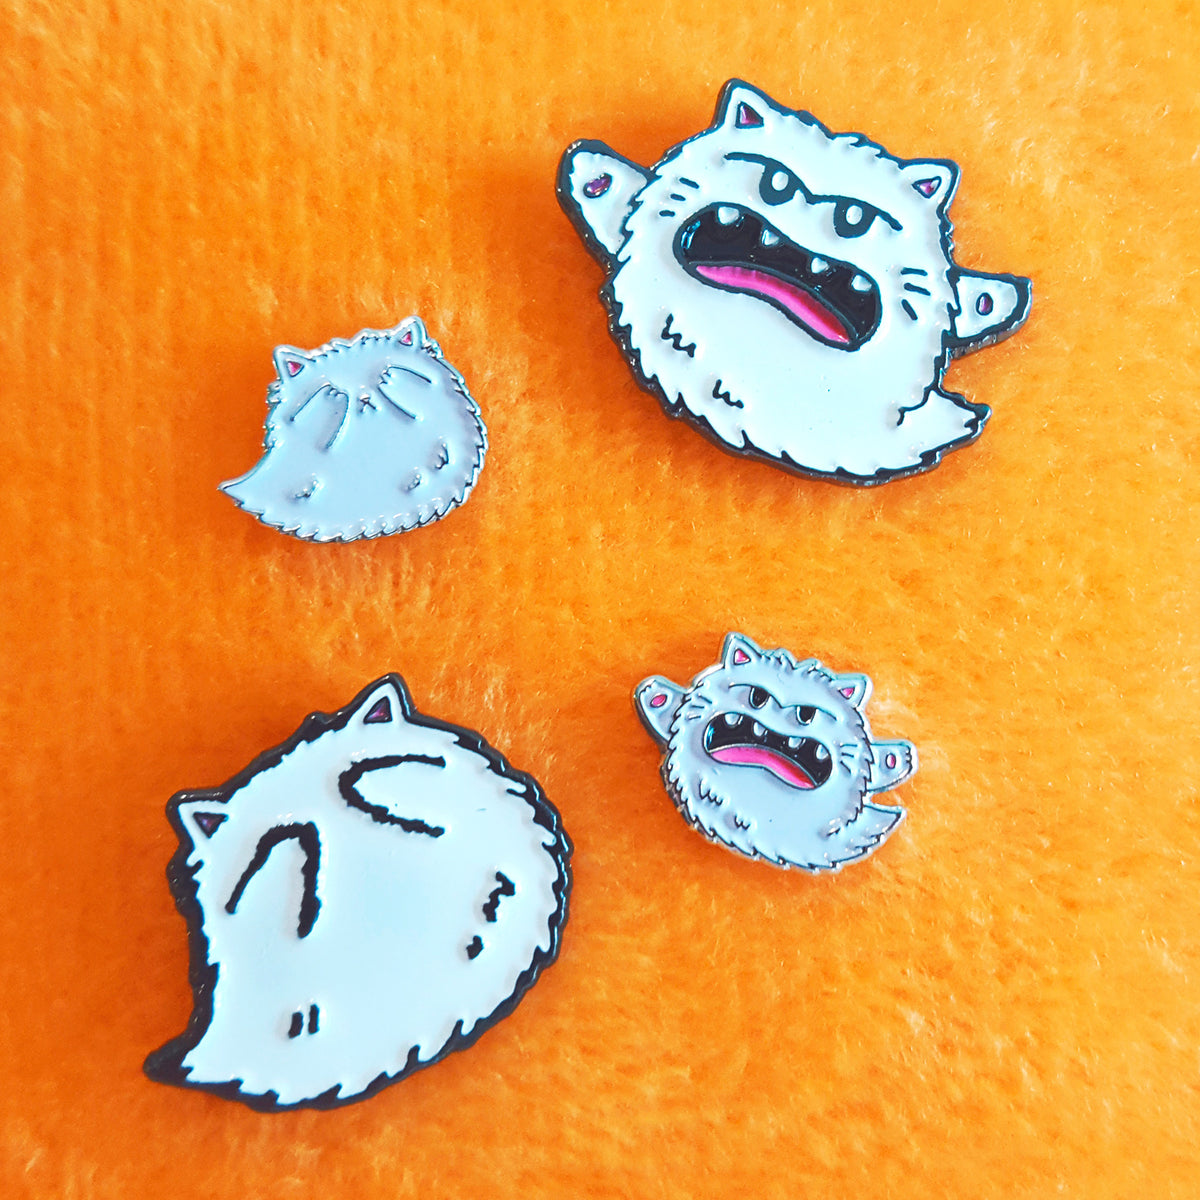 Kitty Boo Boo - Halloween ghost cat pins and earrings by My Cat Is People.